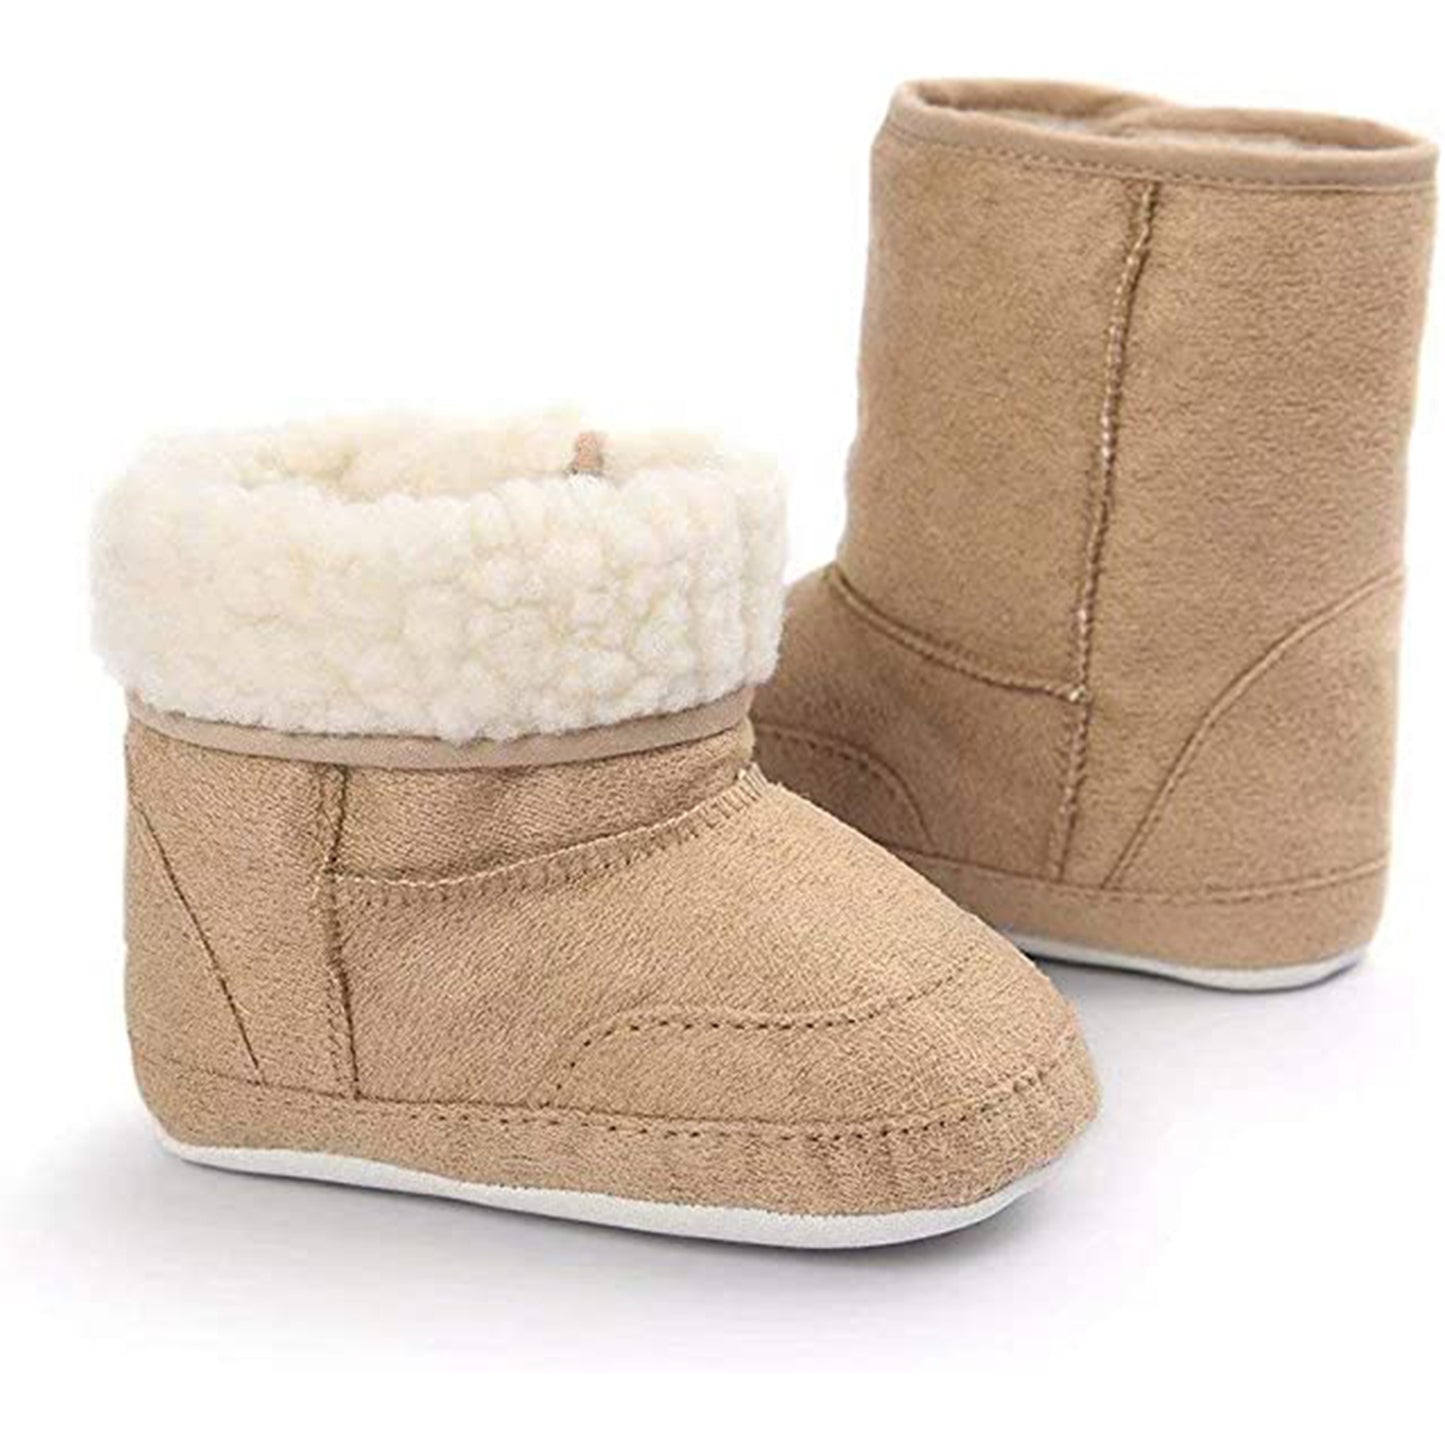 KAUACH Toddler Boots Soft Anti-Slip Sole Winter Boots for Infant Baby Girls